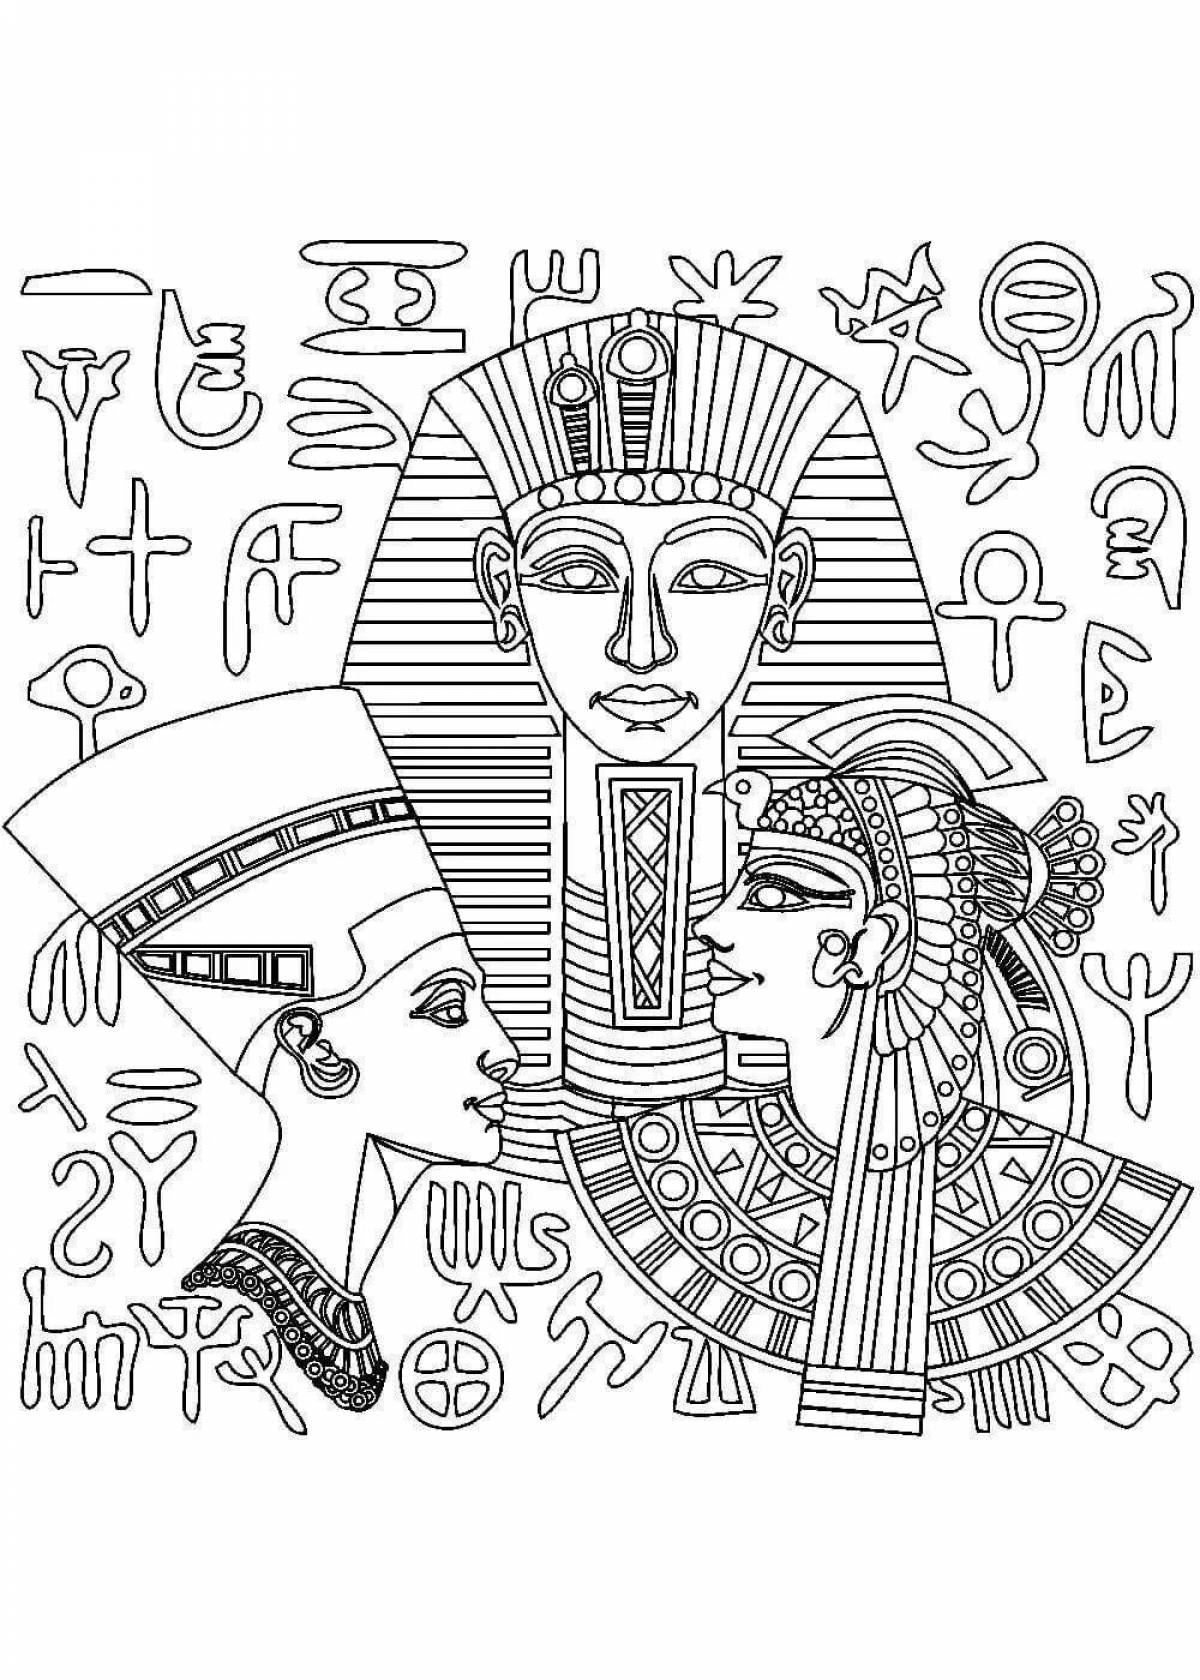 Exquisite pharaoh coloring book